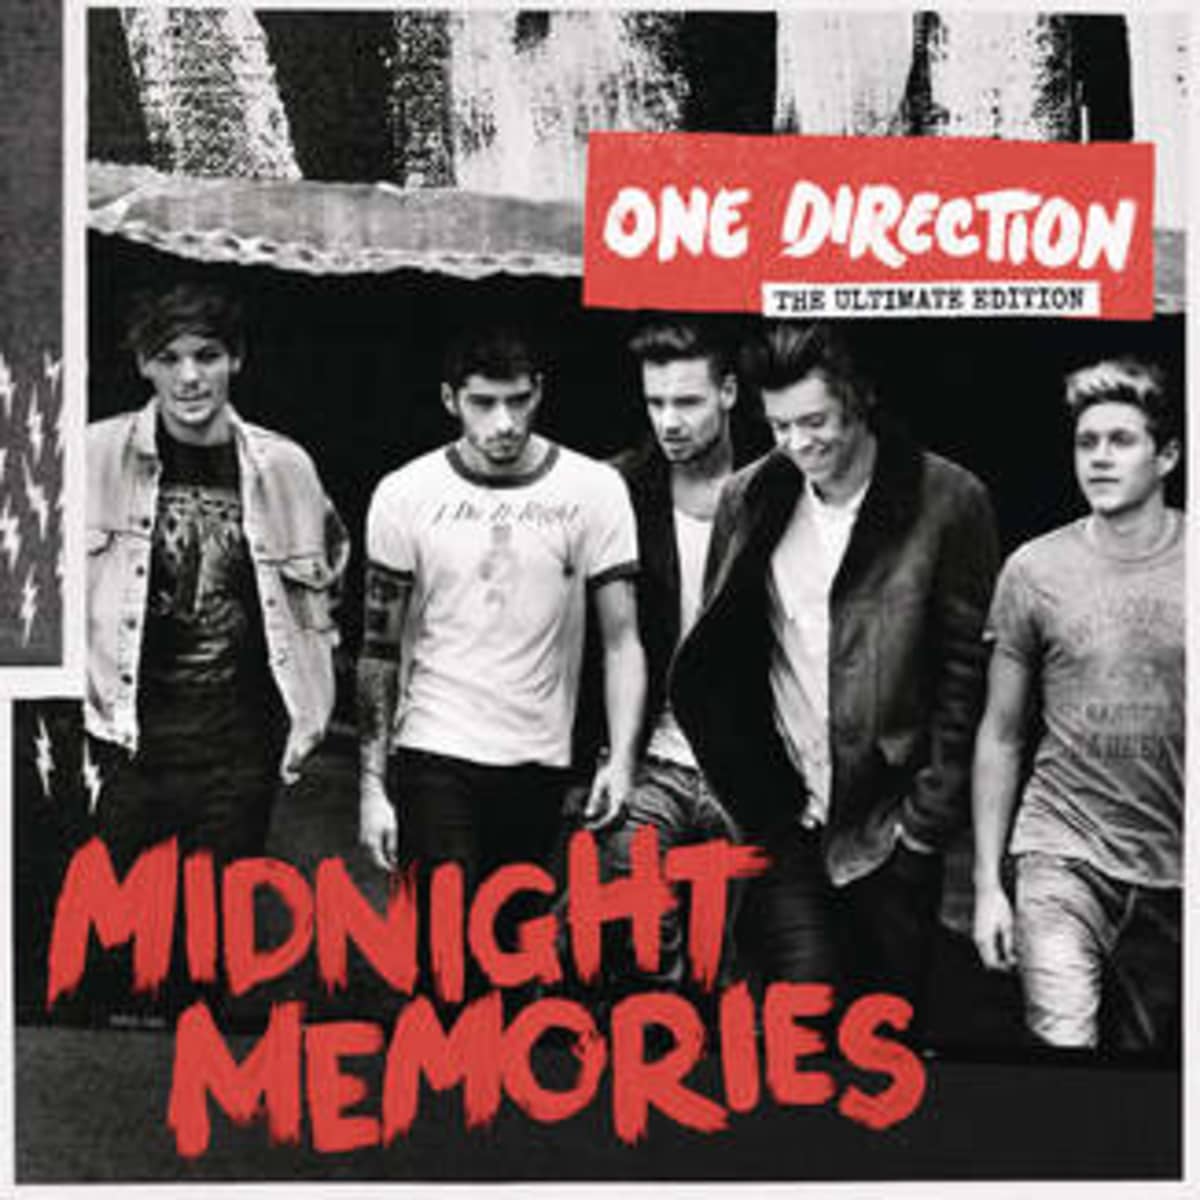 midnight memories song leaked